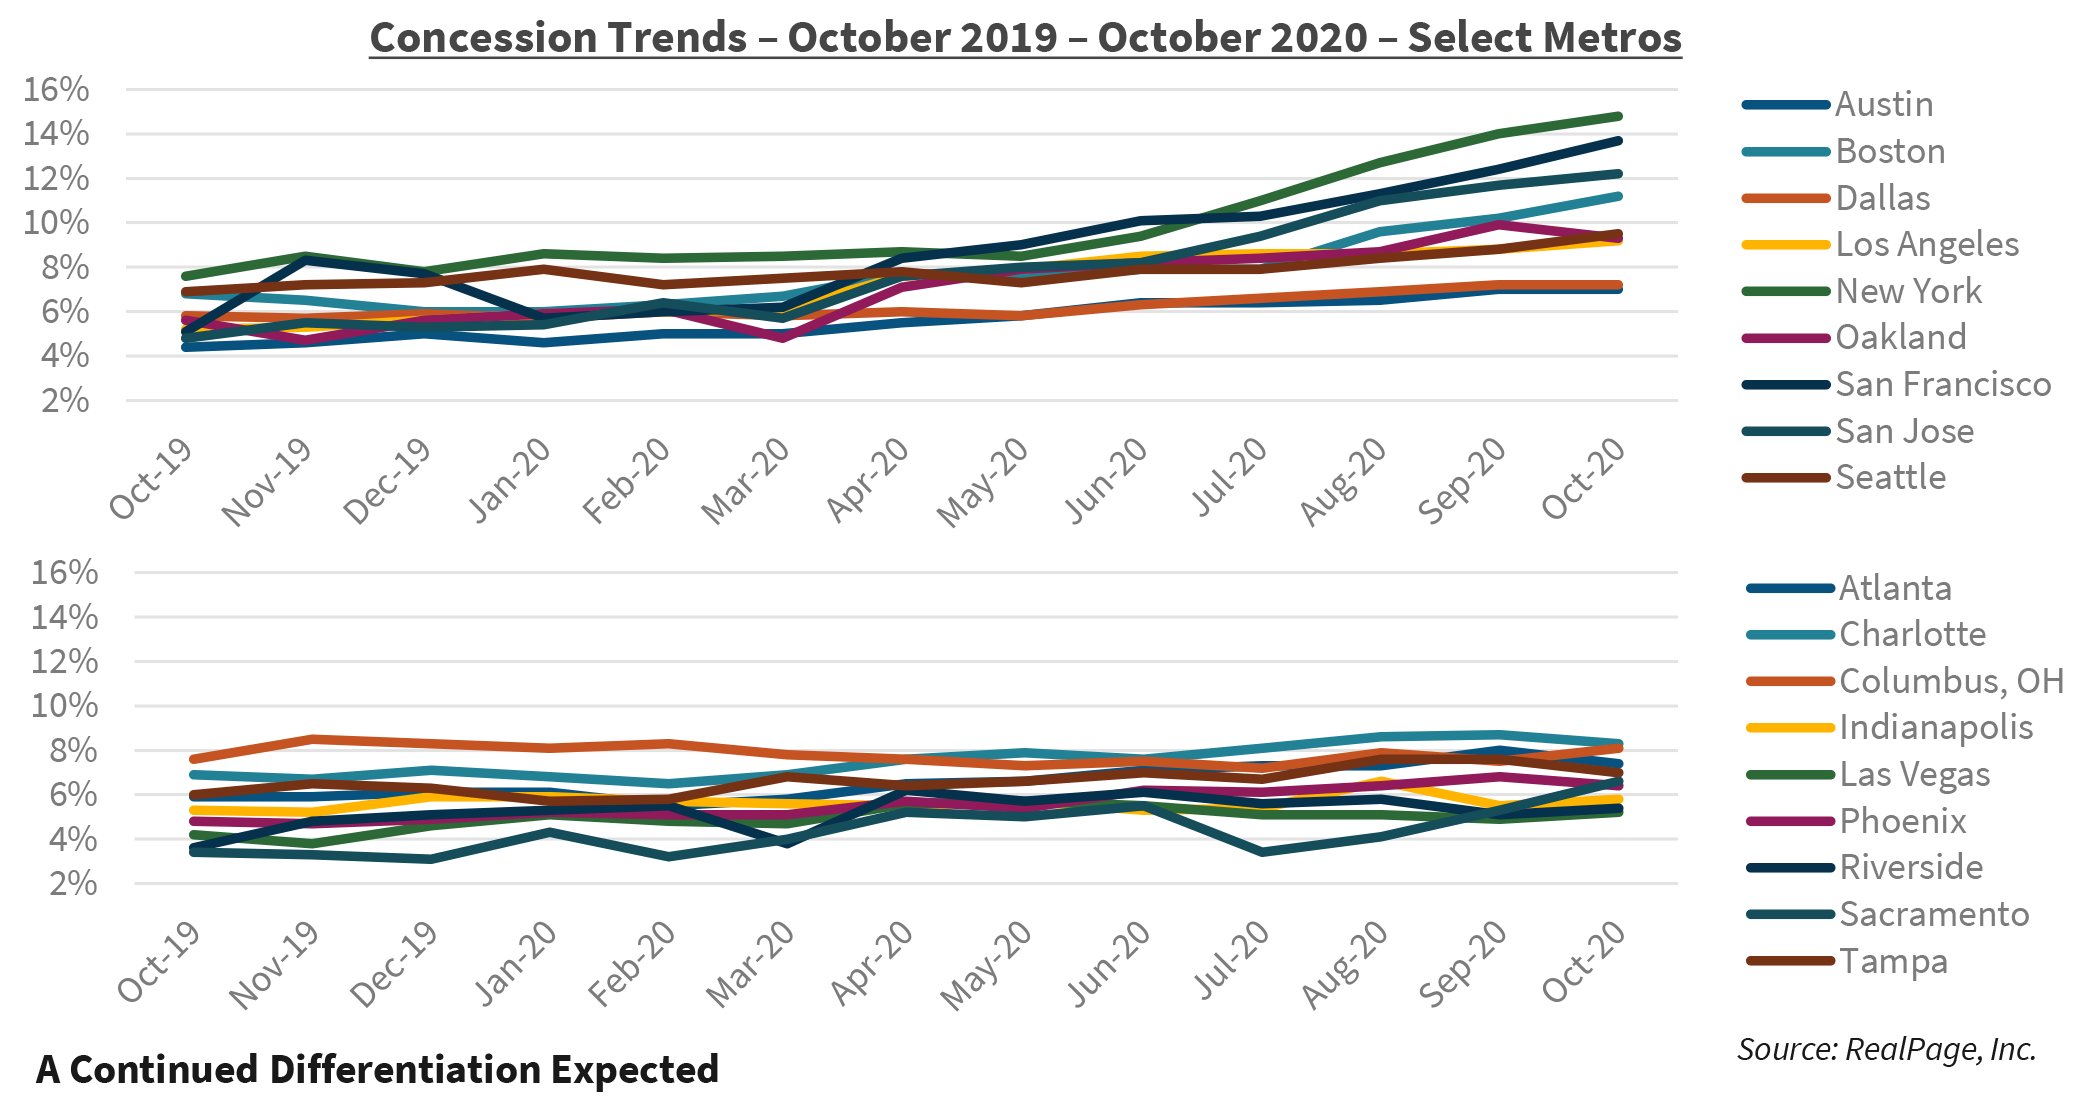 Concession Trends – October 2019 – October 2020 – Select Metros